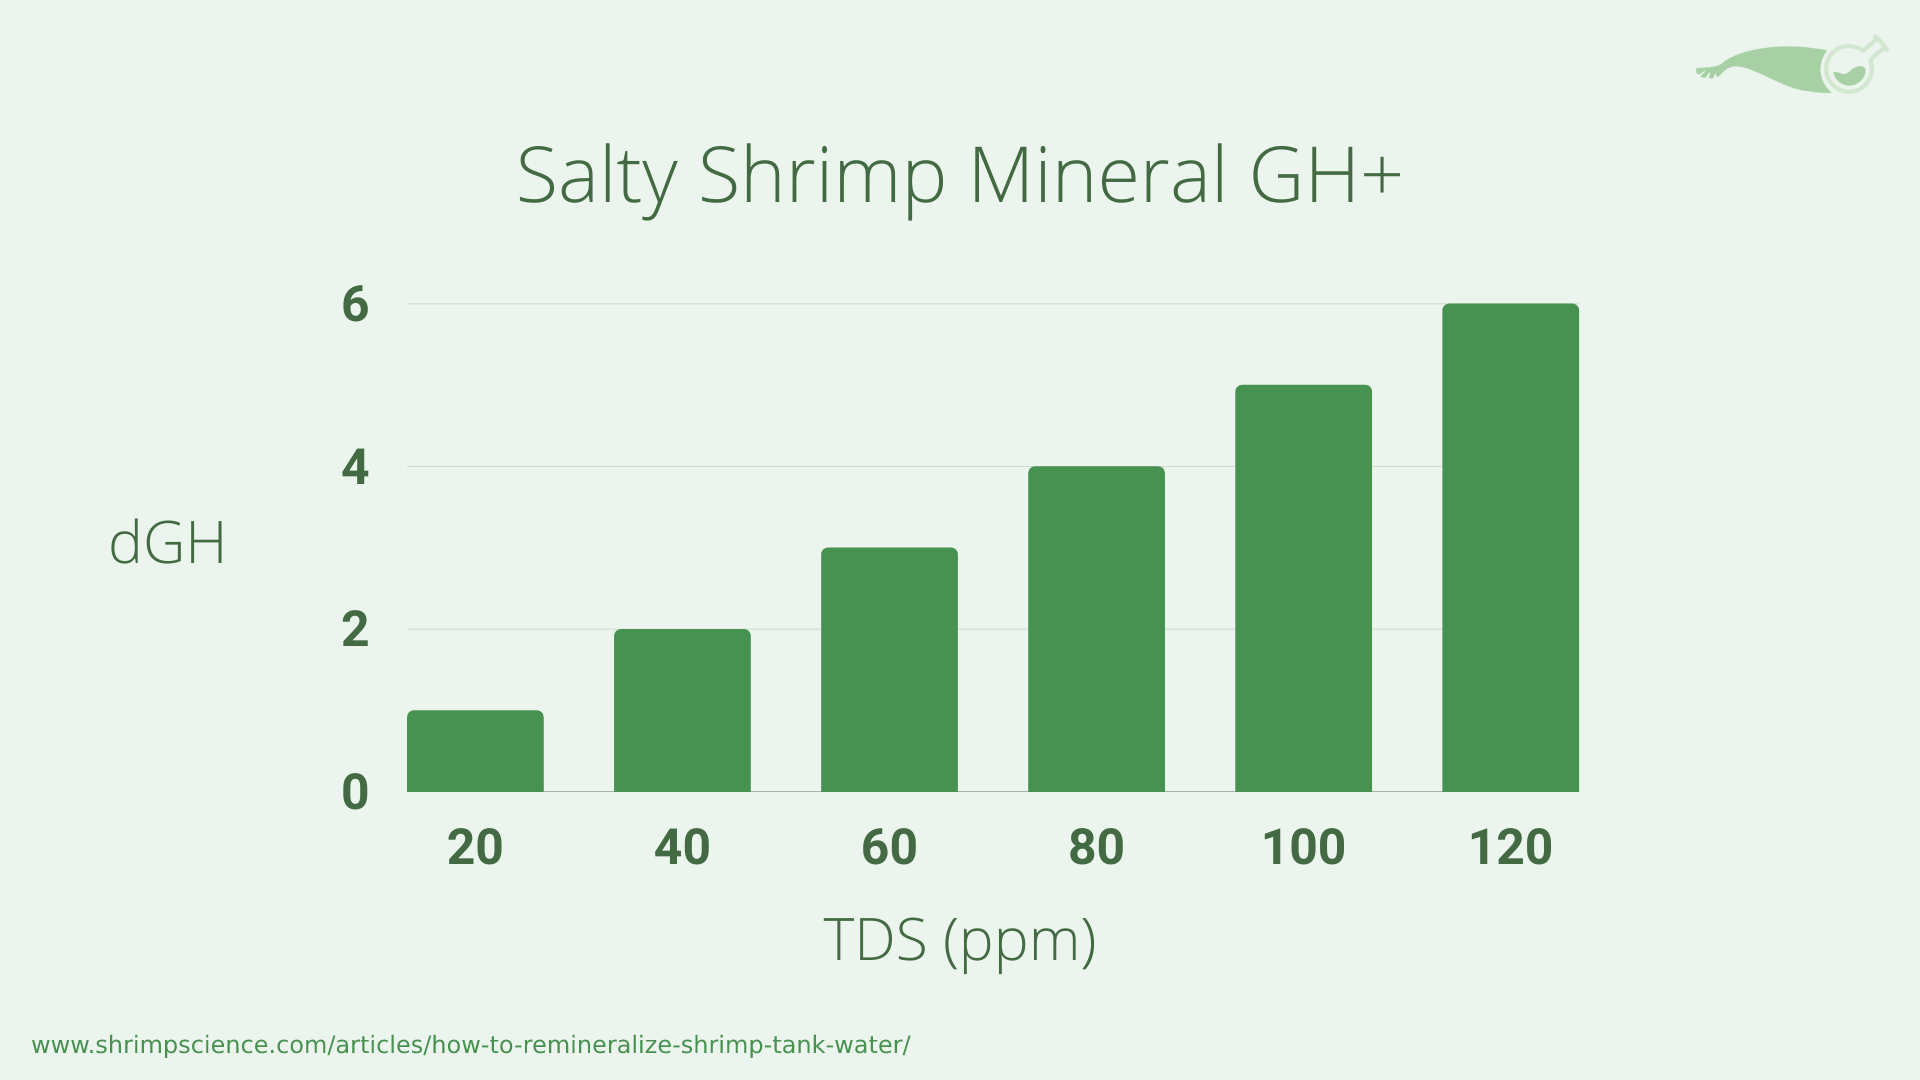 A chart showing the estimated GH at various TDS levels for Salty Shrimp GH+ remineralizer